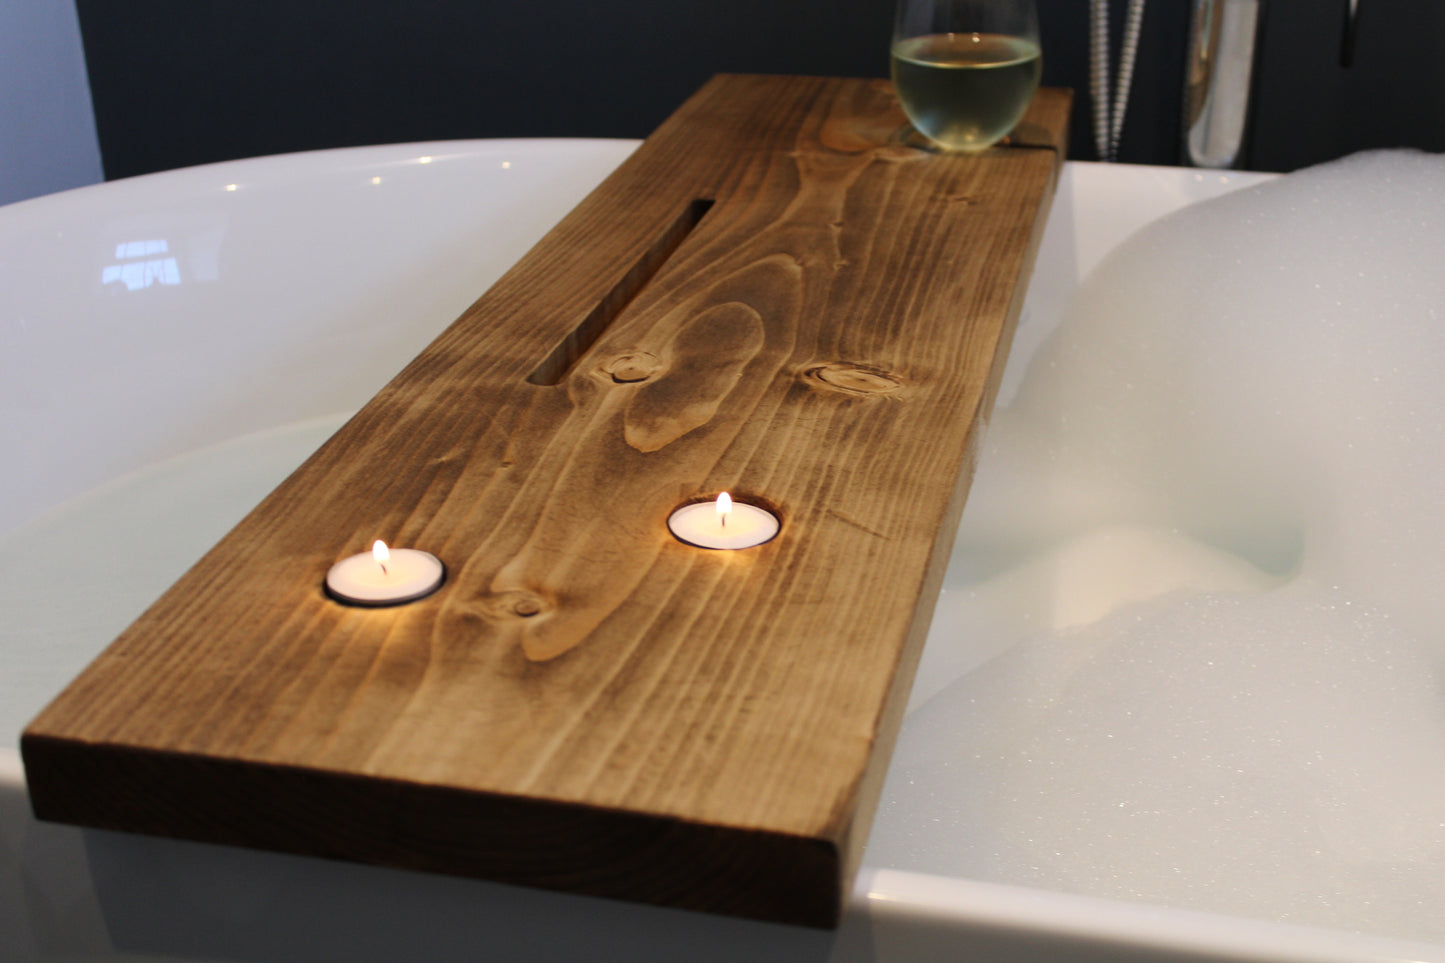 Rustic Bath Caddy Board with Wine Glass, Tablet and Tea Light Holders